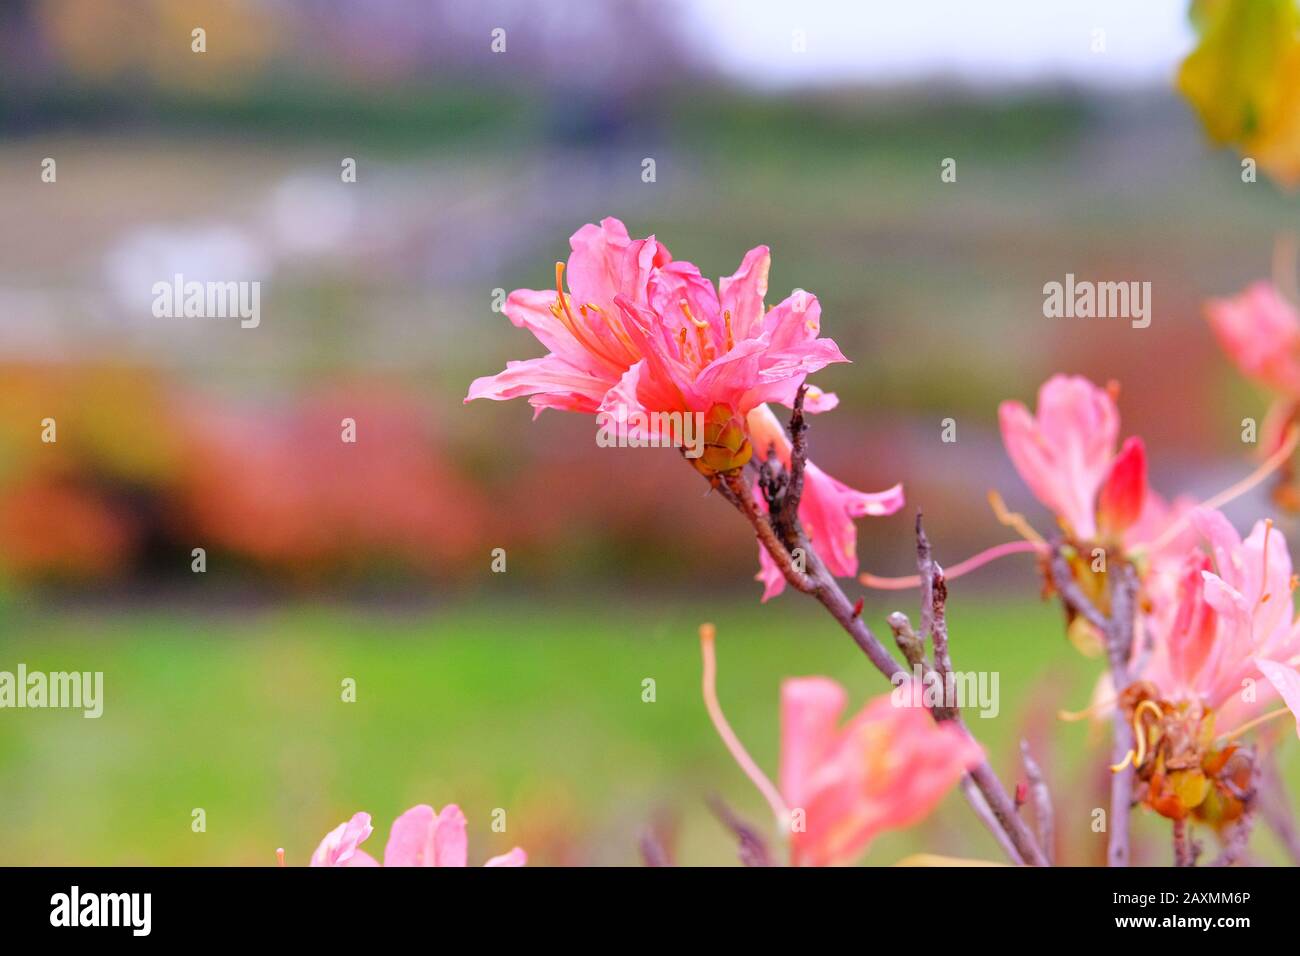 Rhododendron molle is blooming in city park. Pink flowers is growing in garden, close up. Landscaping and decoration in spring season. Stock Photo